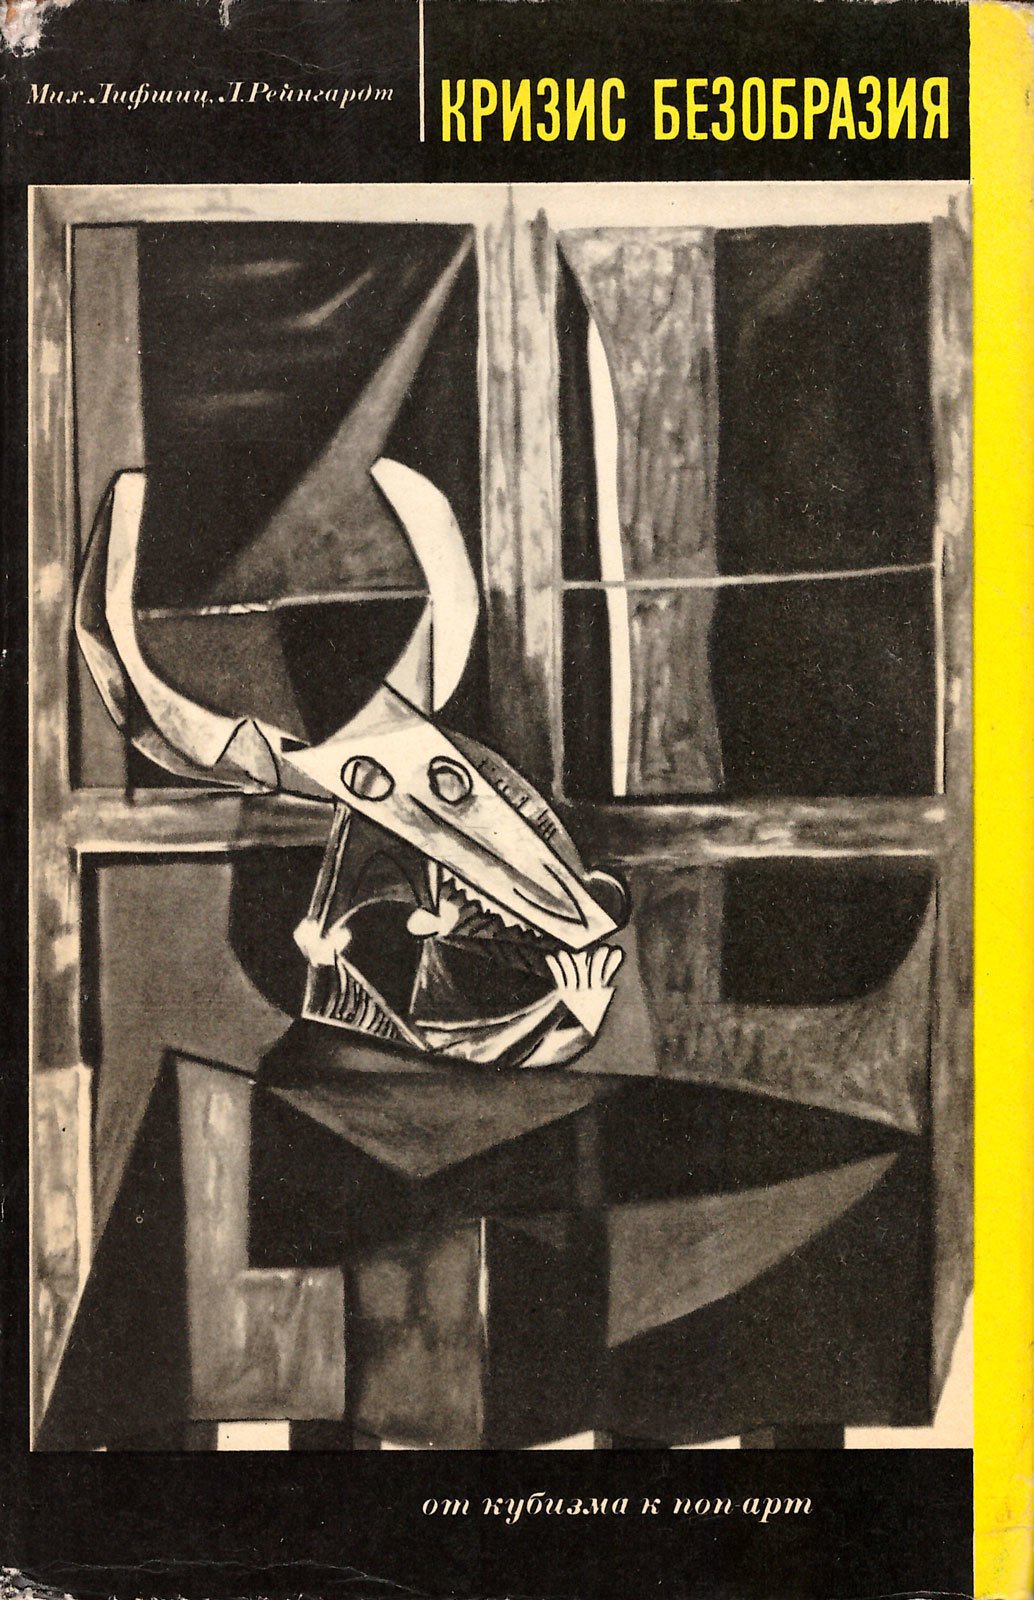 Cover of the publicationMikhail Lifshitz and Lidiya ReingardtThe Crisis of Ugliness: From Cubism to Pop Art (Moscow: Iskusstvo, 1968)Design: Y.A. SmirnovSigned to print September 1, 1967